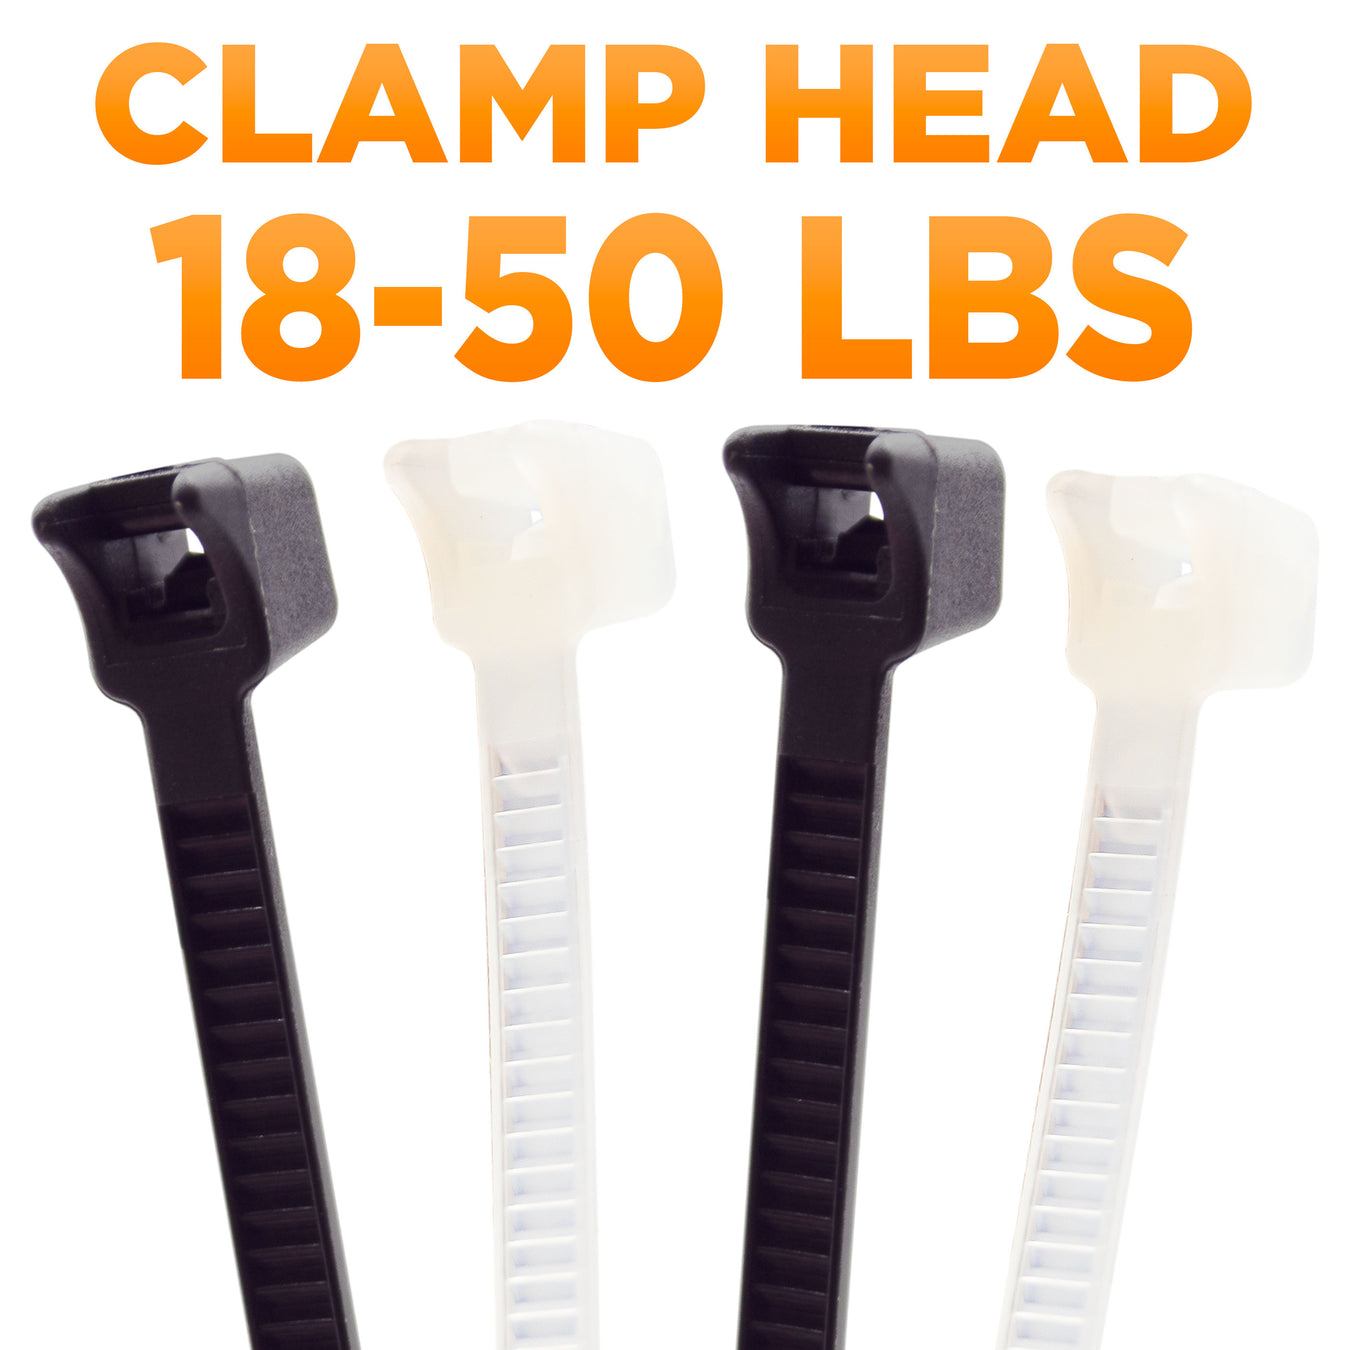 Clamp Head Cable Ties